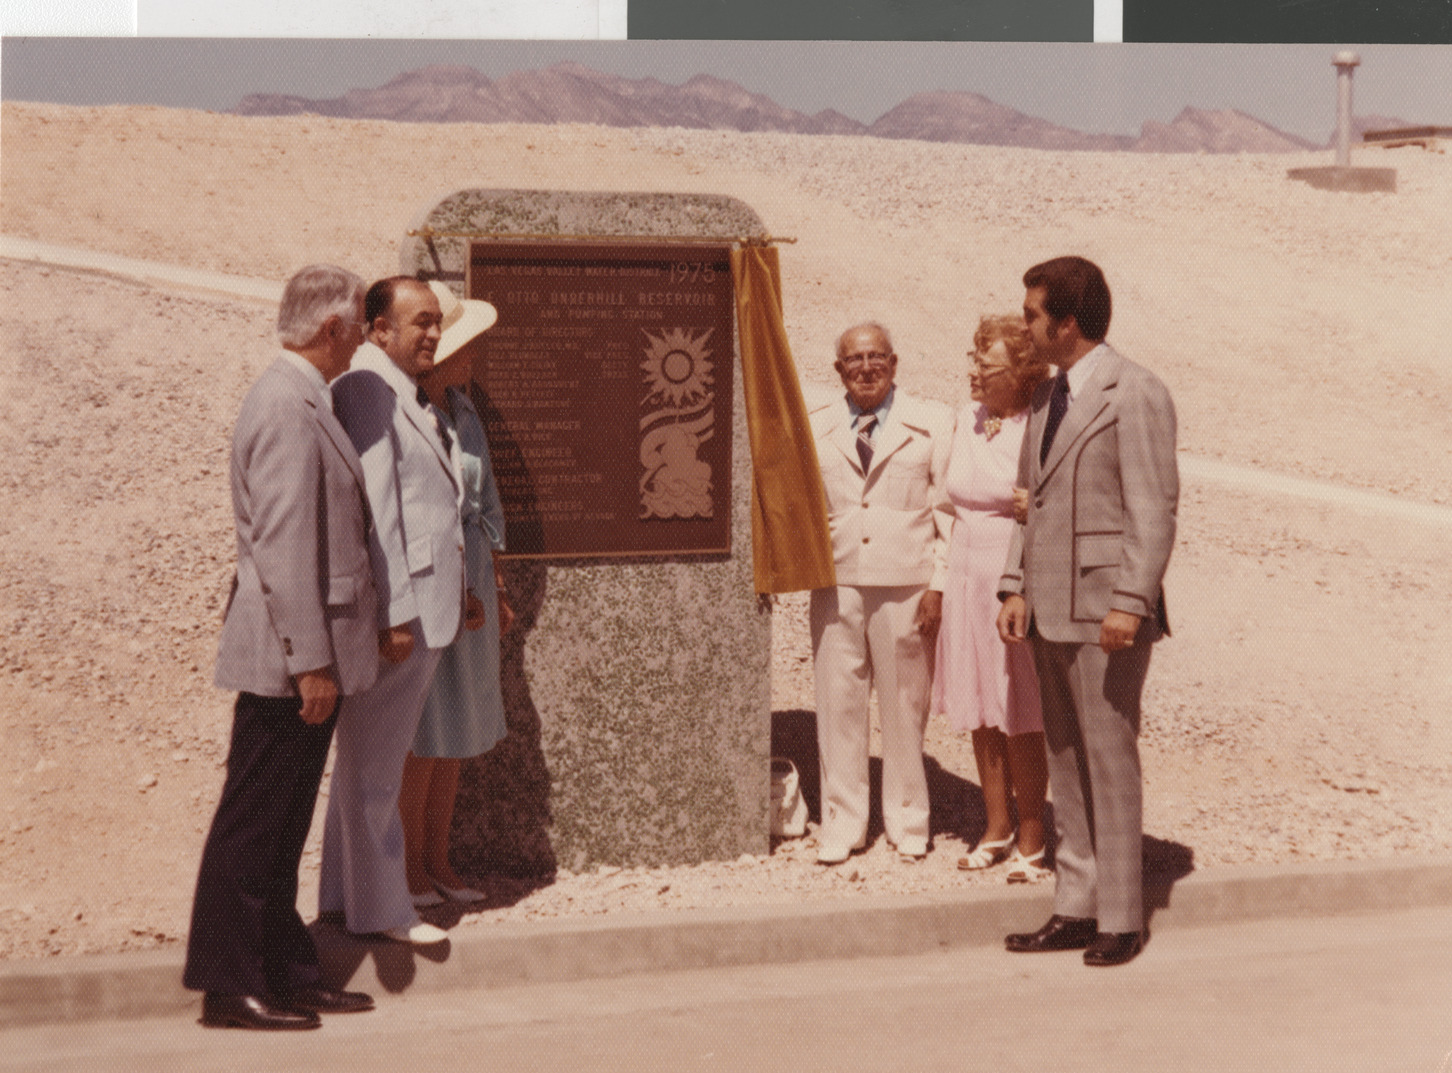 Photograph of Ron Lurie (right) at the dedication of a plaque for the Otto Underhill Reservoir, 1975